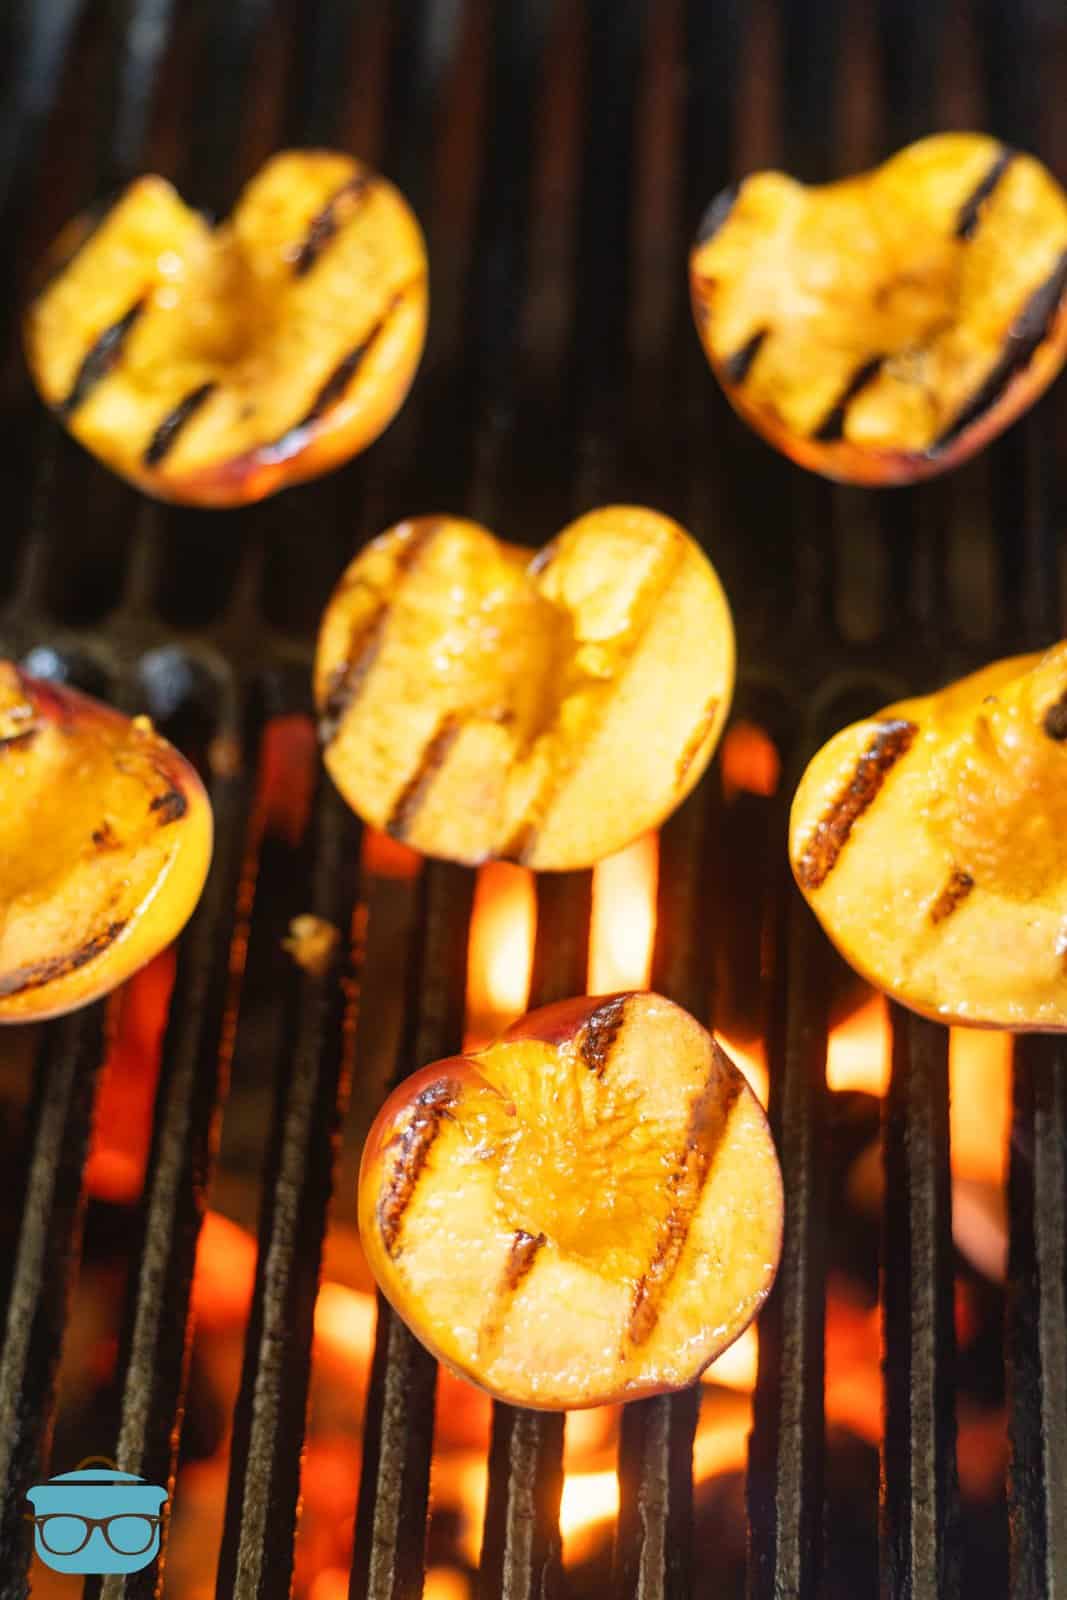 Cut side of peaches up on grill.